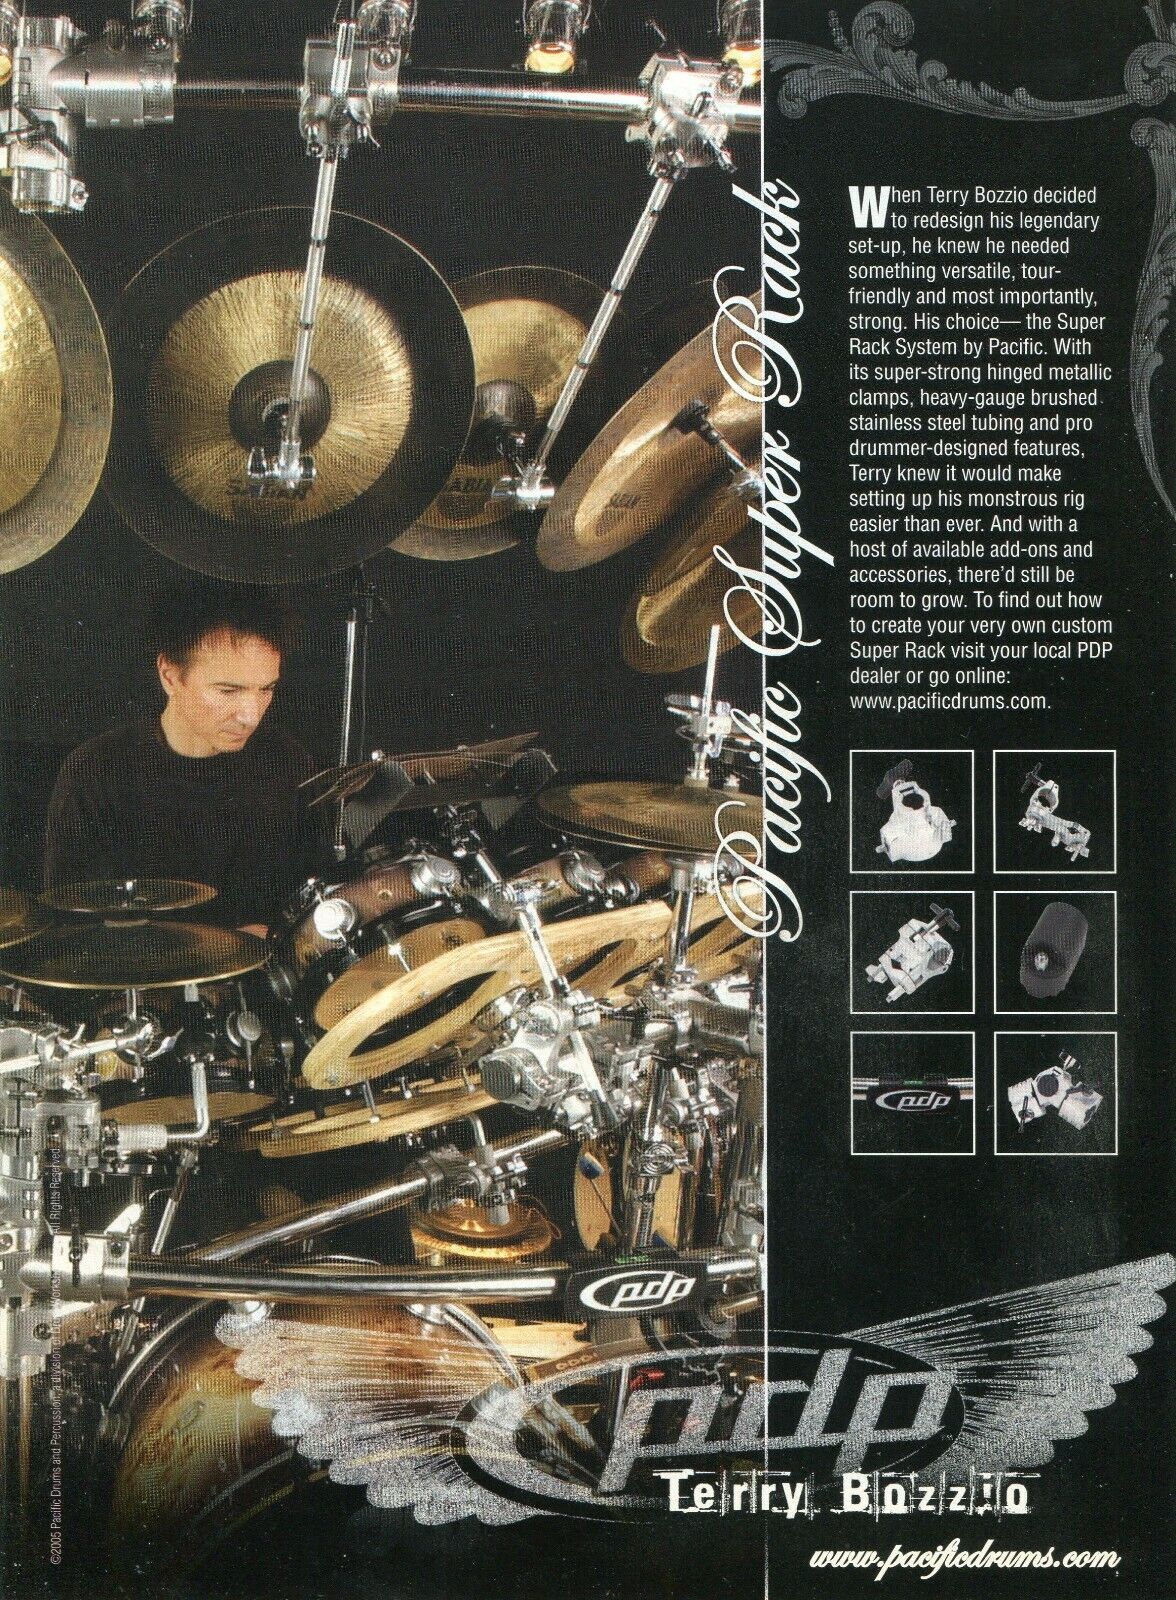 2005 Print Ad of DW Drum Workshop PDP Pacific Super Rack System w Terry Bozzio